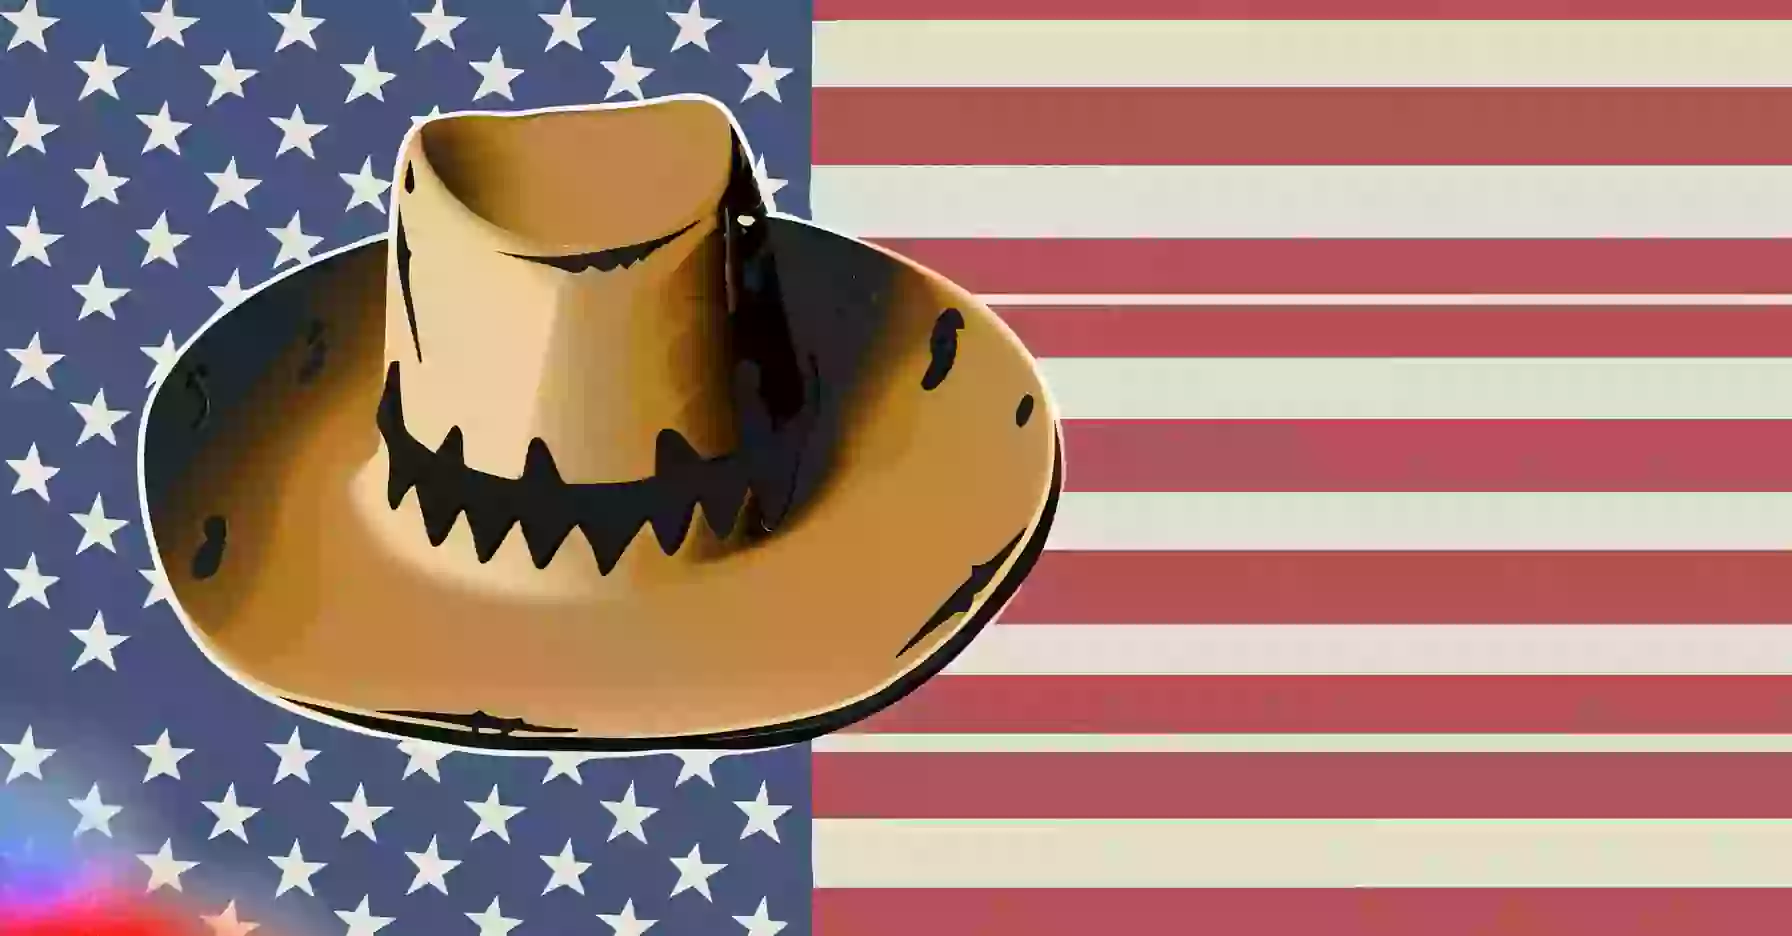 What Countries Wears Cowboy